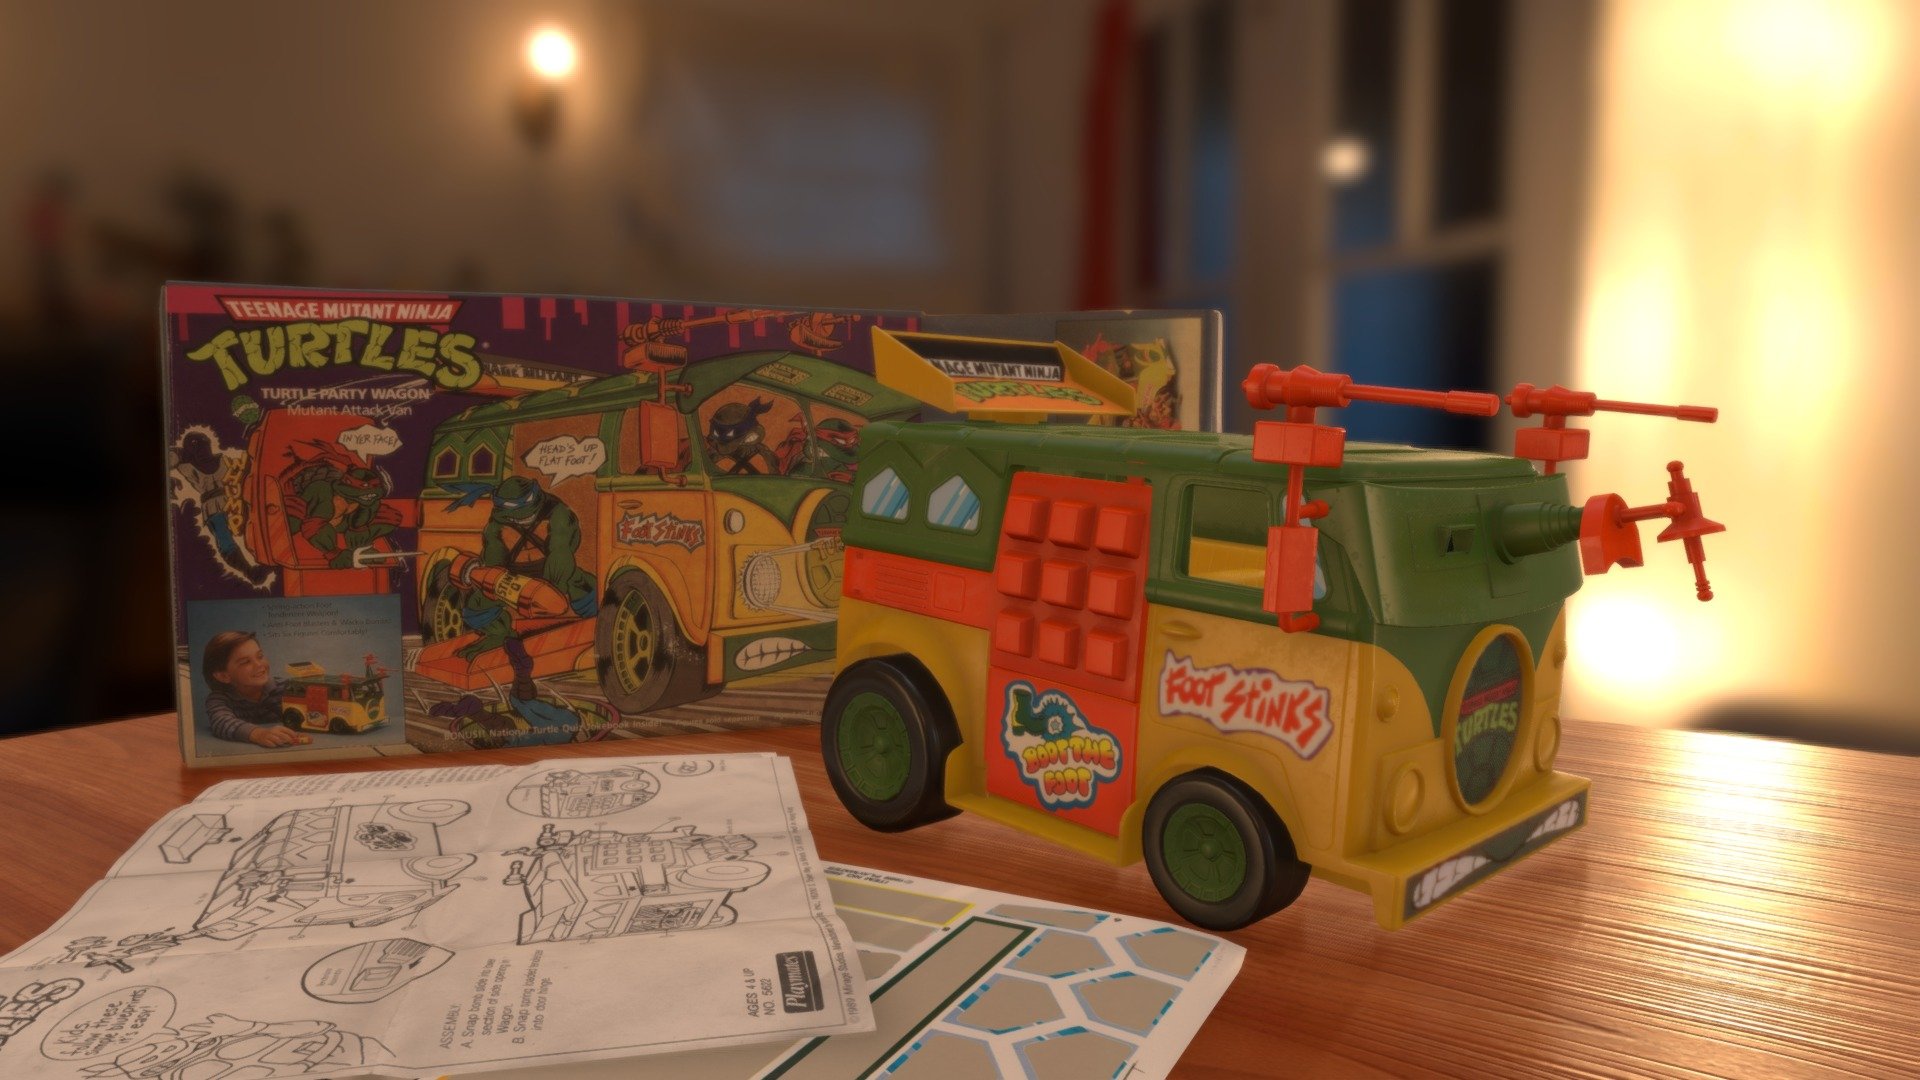 This is the Teenage Mutant Ninja Turtles Party Wagon created in 1988 by Hasbro. It was my favorite toy when I was a kid.
I hope you like it!

Here are some HQ renders:



 - 1988 TMNT Party Wagon Toy - 3D model by Javi Garcia (@javiryo) 3d model